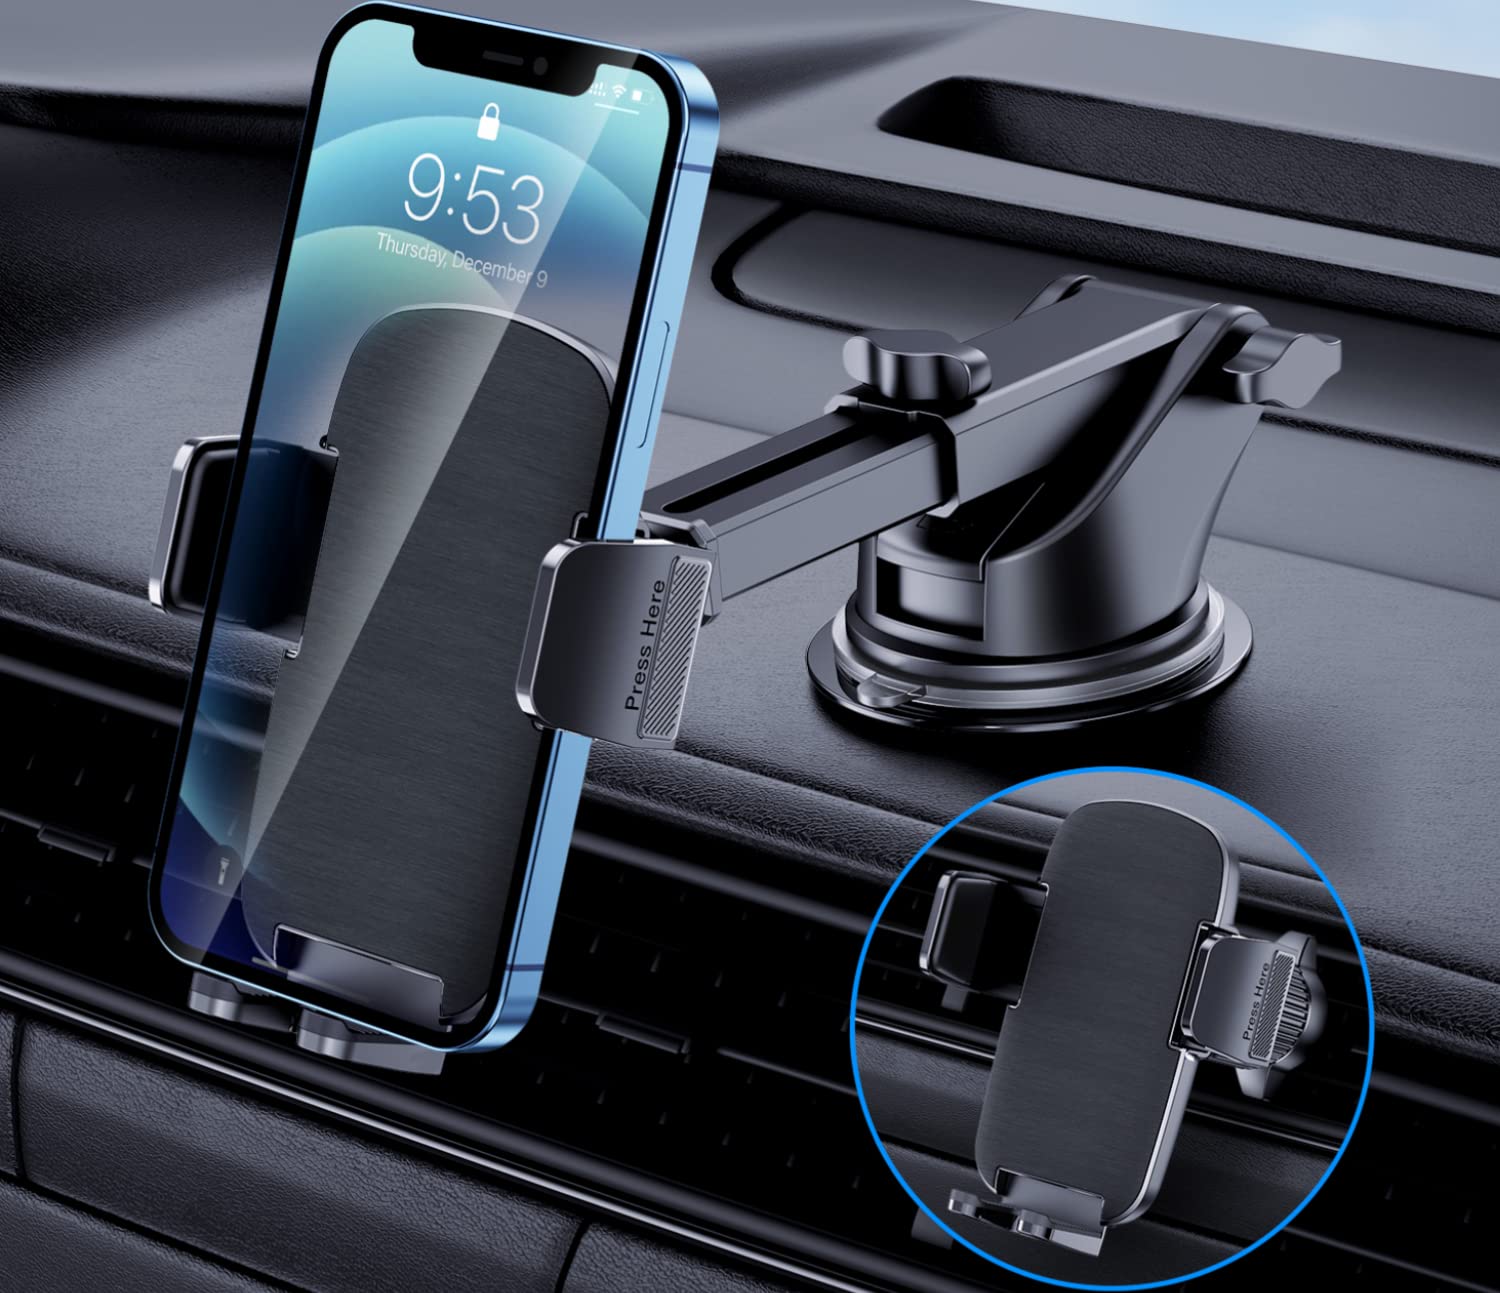 Phone Mount for Car Phone Holder [Military-Grade Suction & Stable Clip]Car Phone Holder Mount Windshield Dashboard Air Vent Universal Cell Phone Automobile Mount Fit For All iPhone Android Smartphones